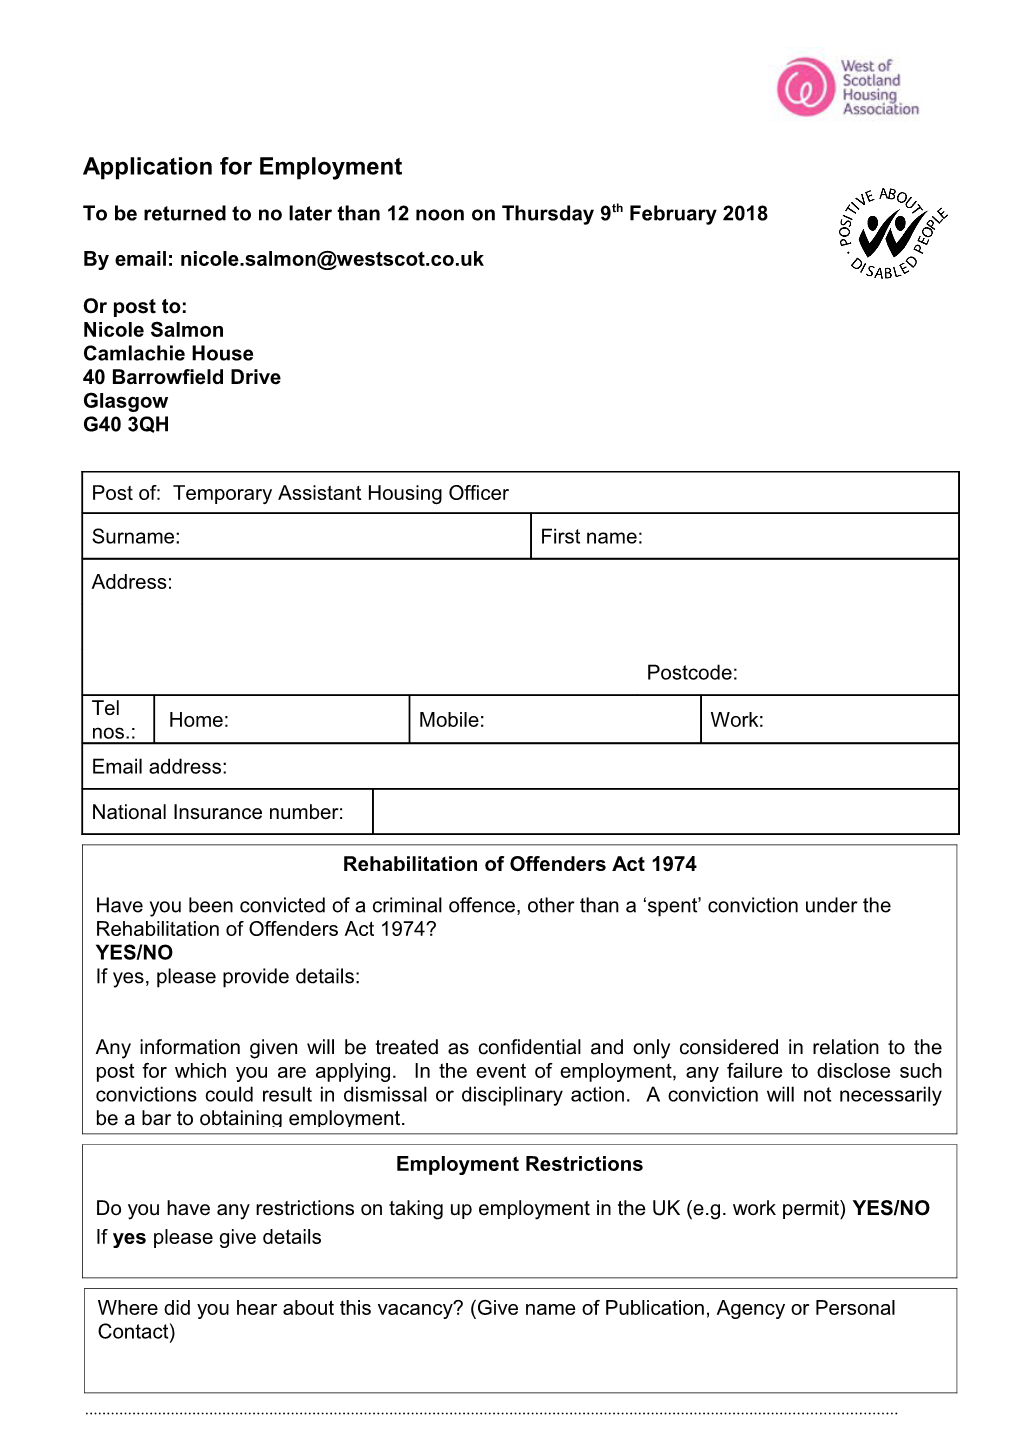 Application for Employment s102